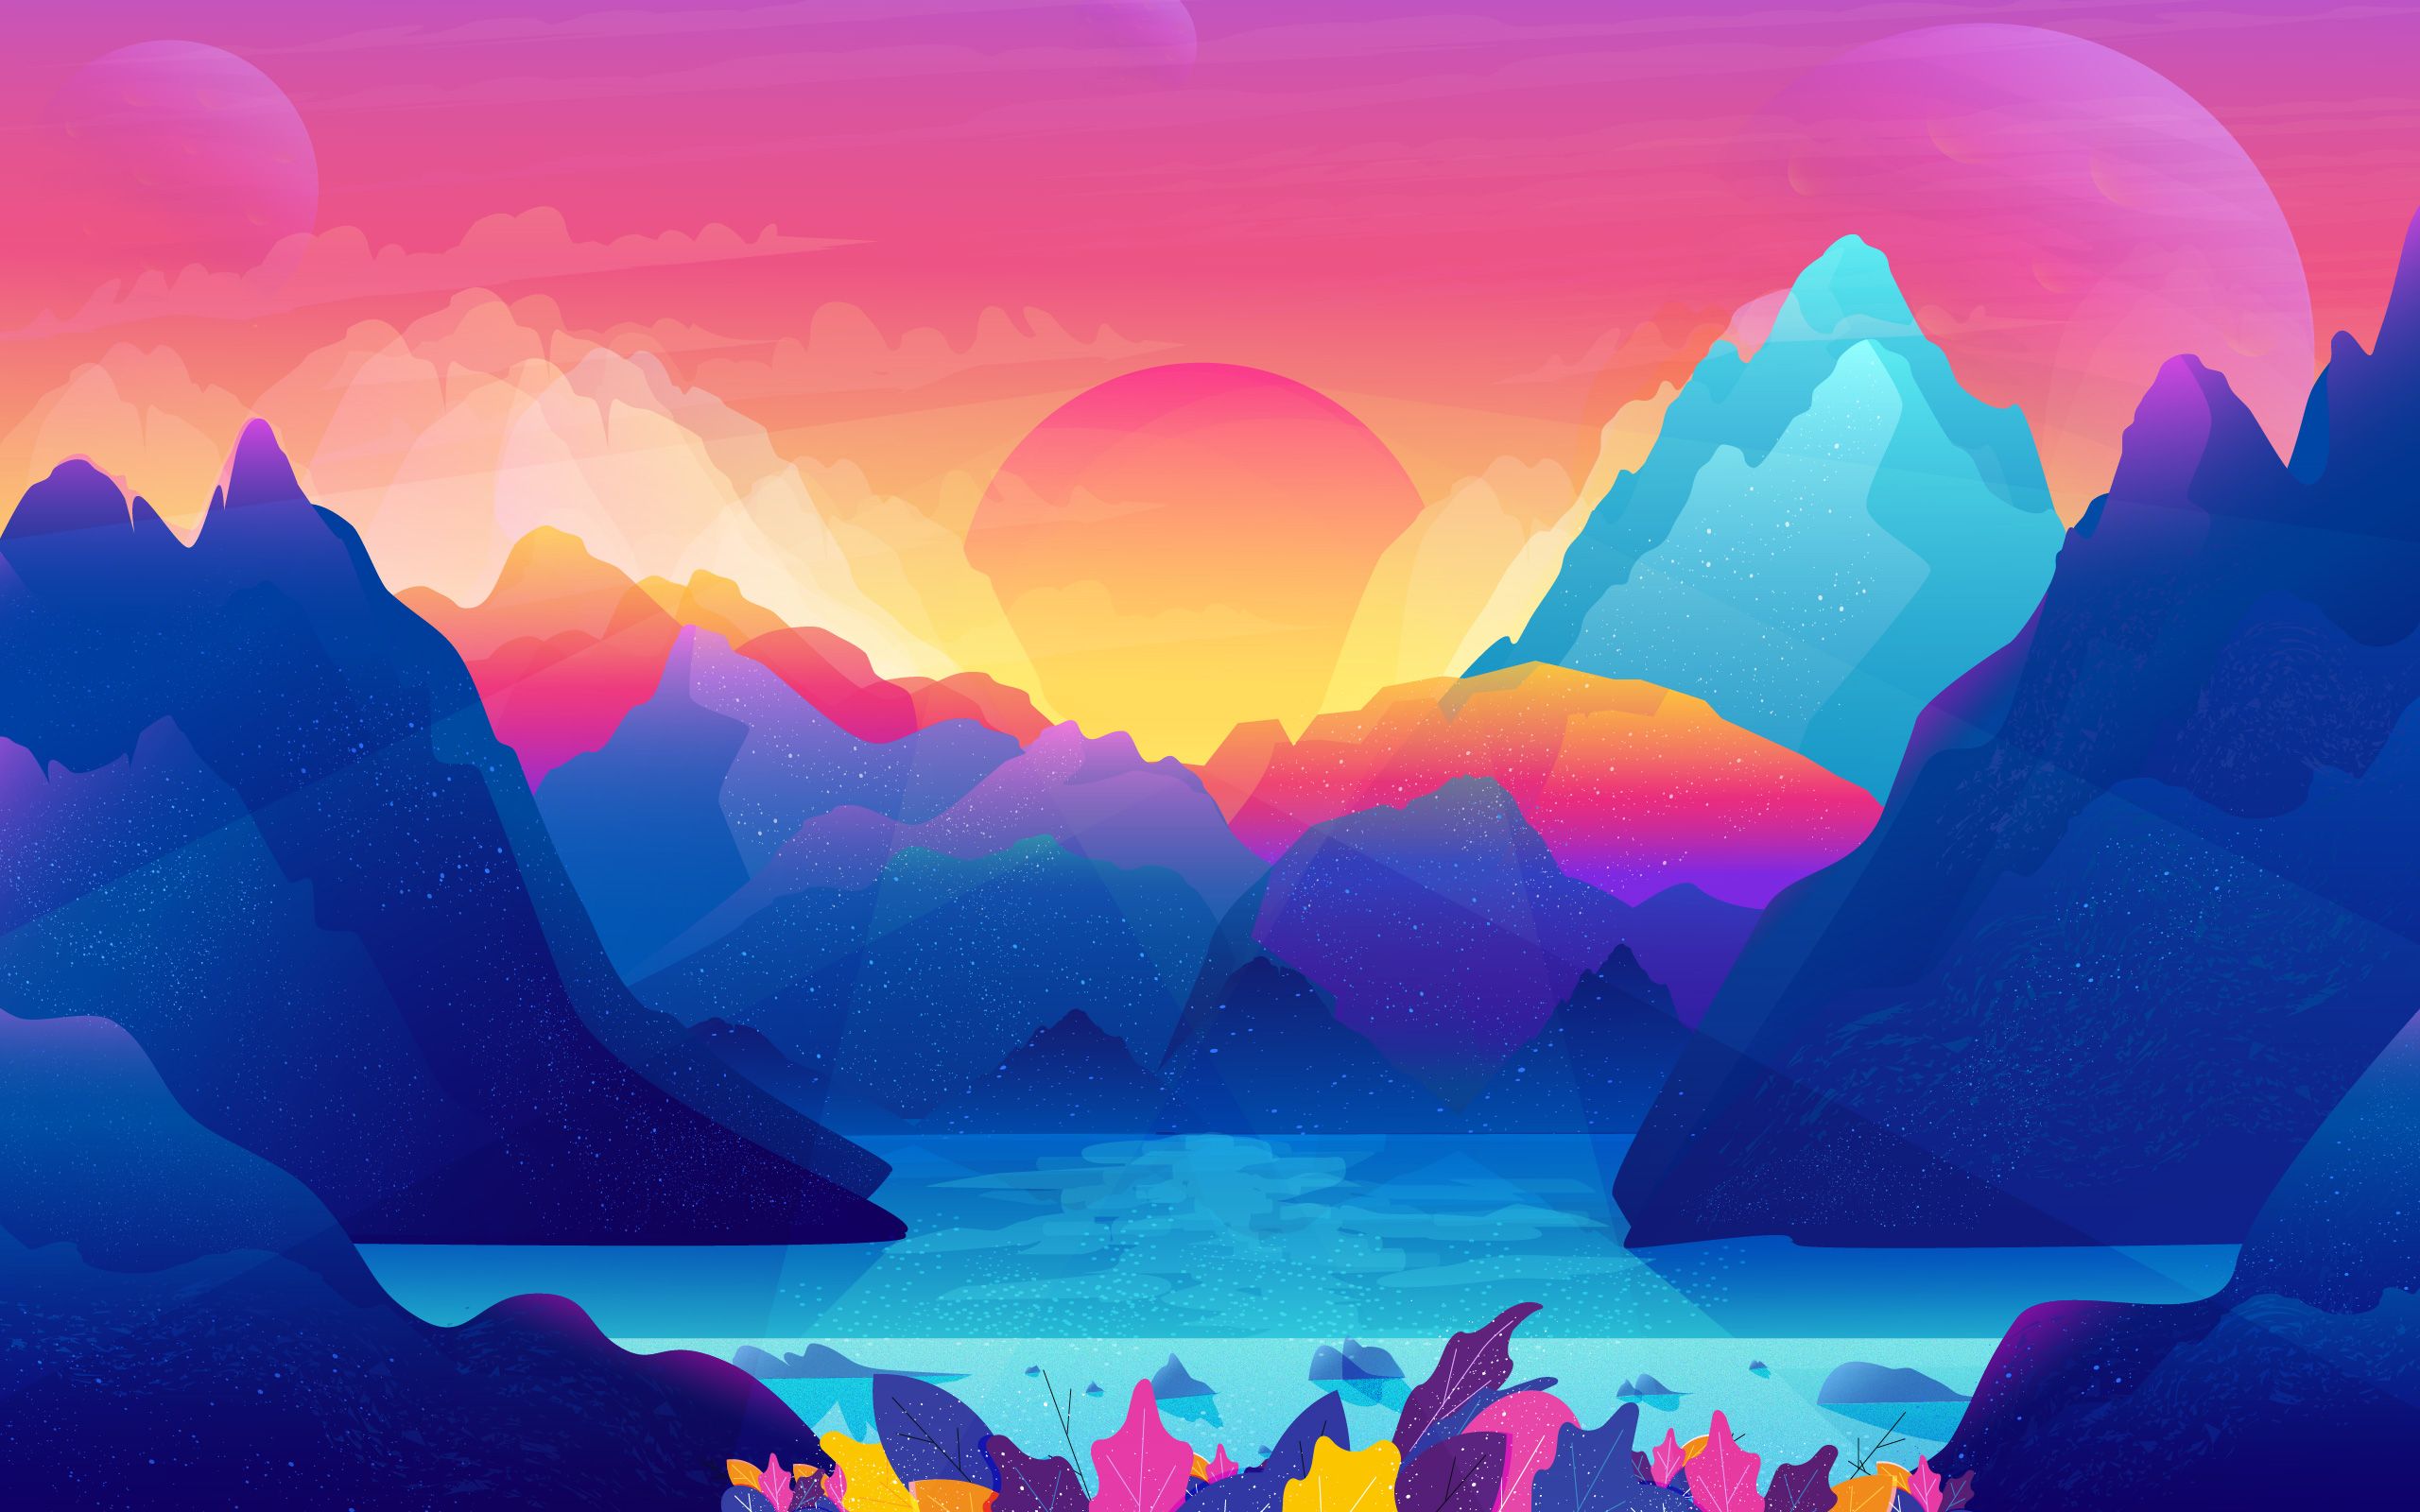 Sunrise Illustration, HD Artist, 4k Wallpaper, Image, Background, Photo and Picture